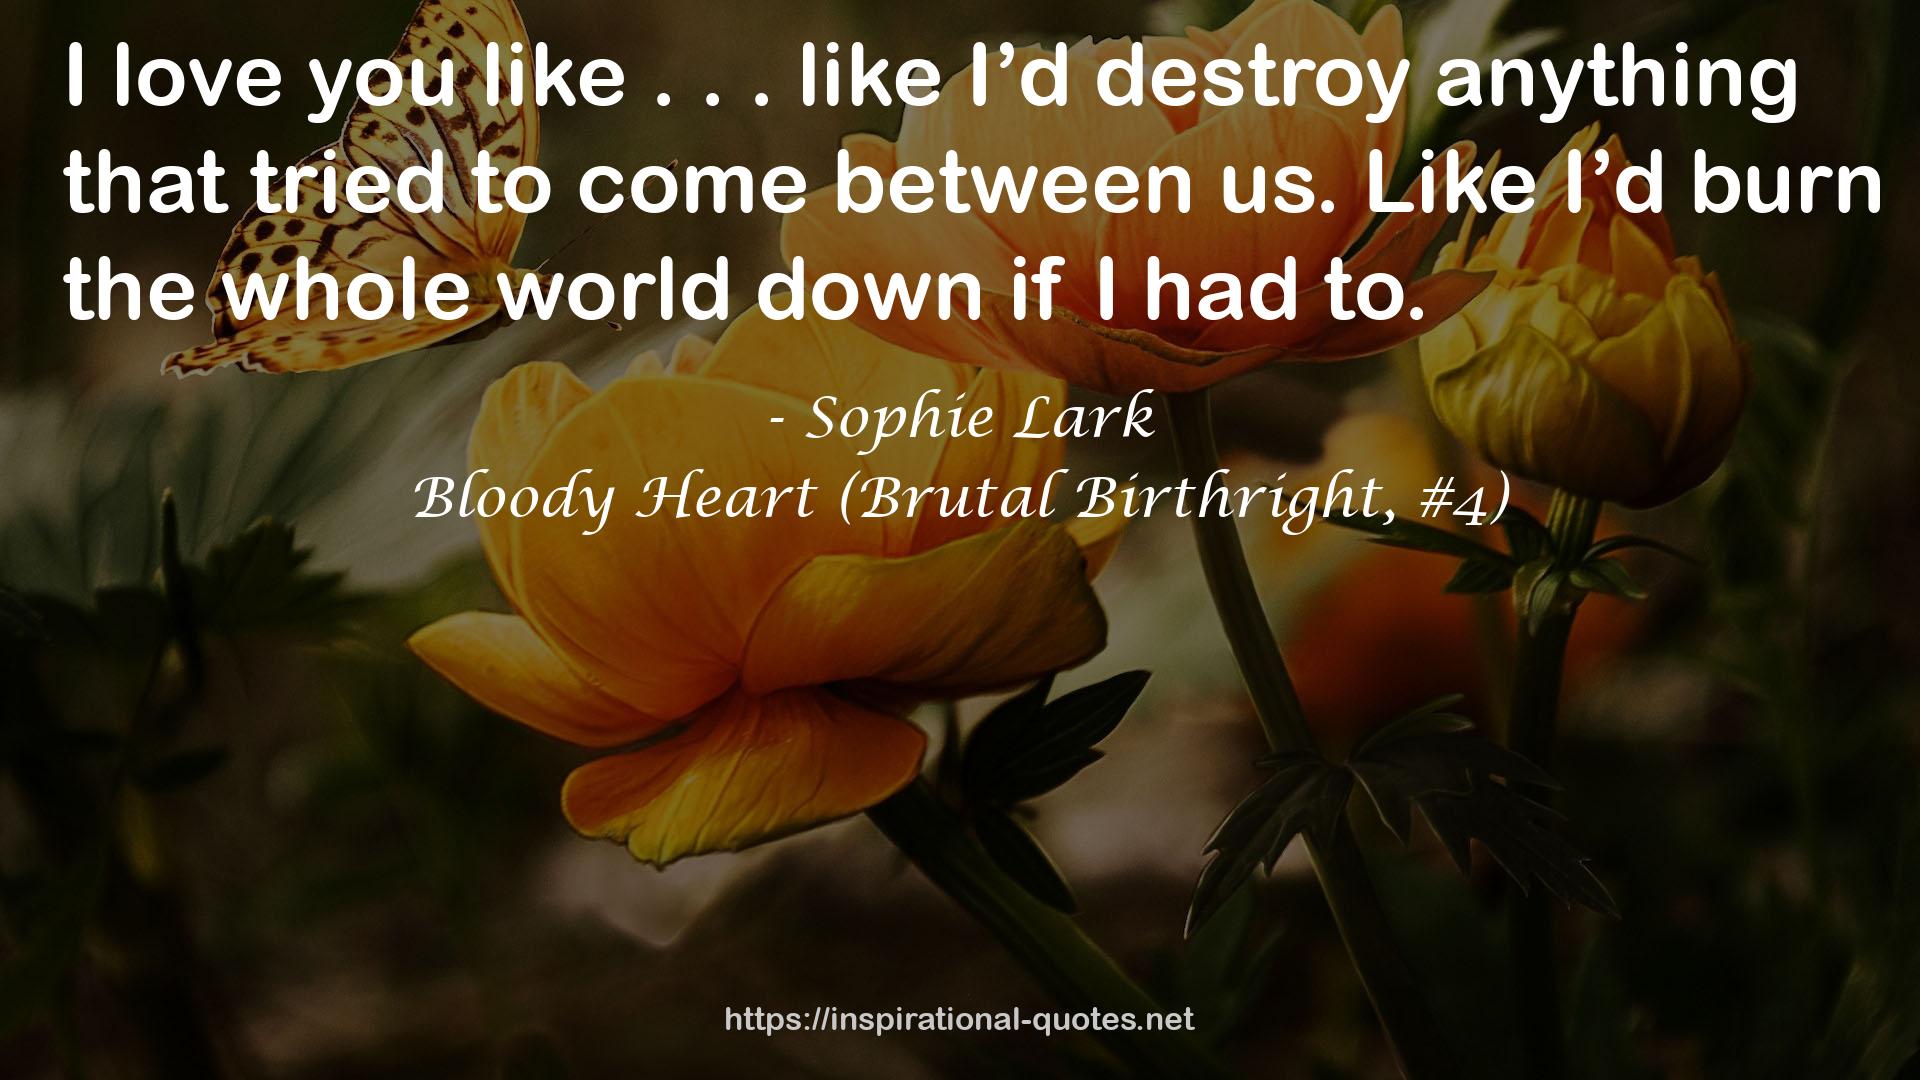 Bloody Heart (Brutal Birthright, #4) QUOTES